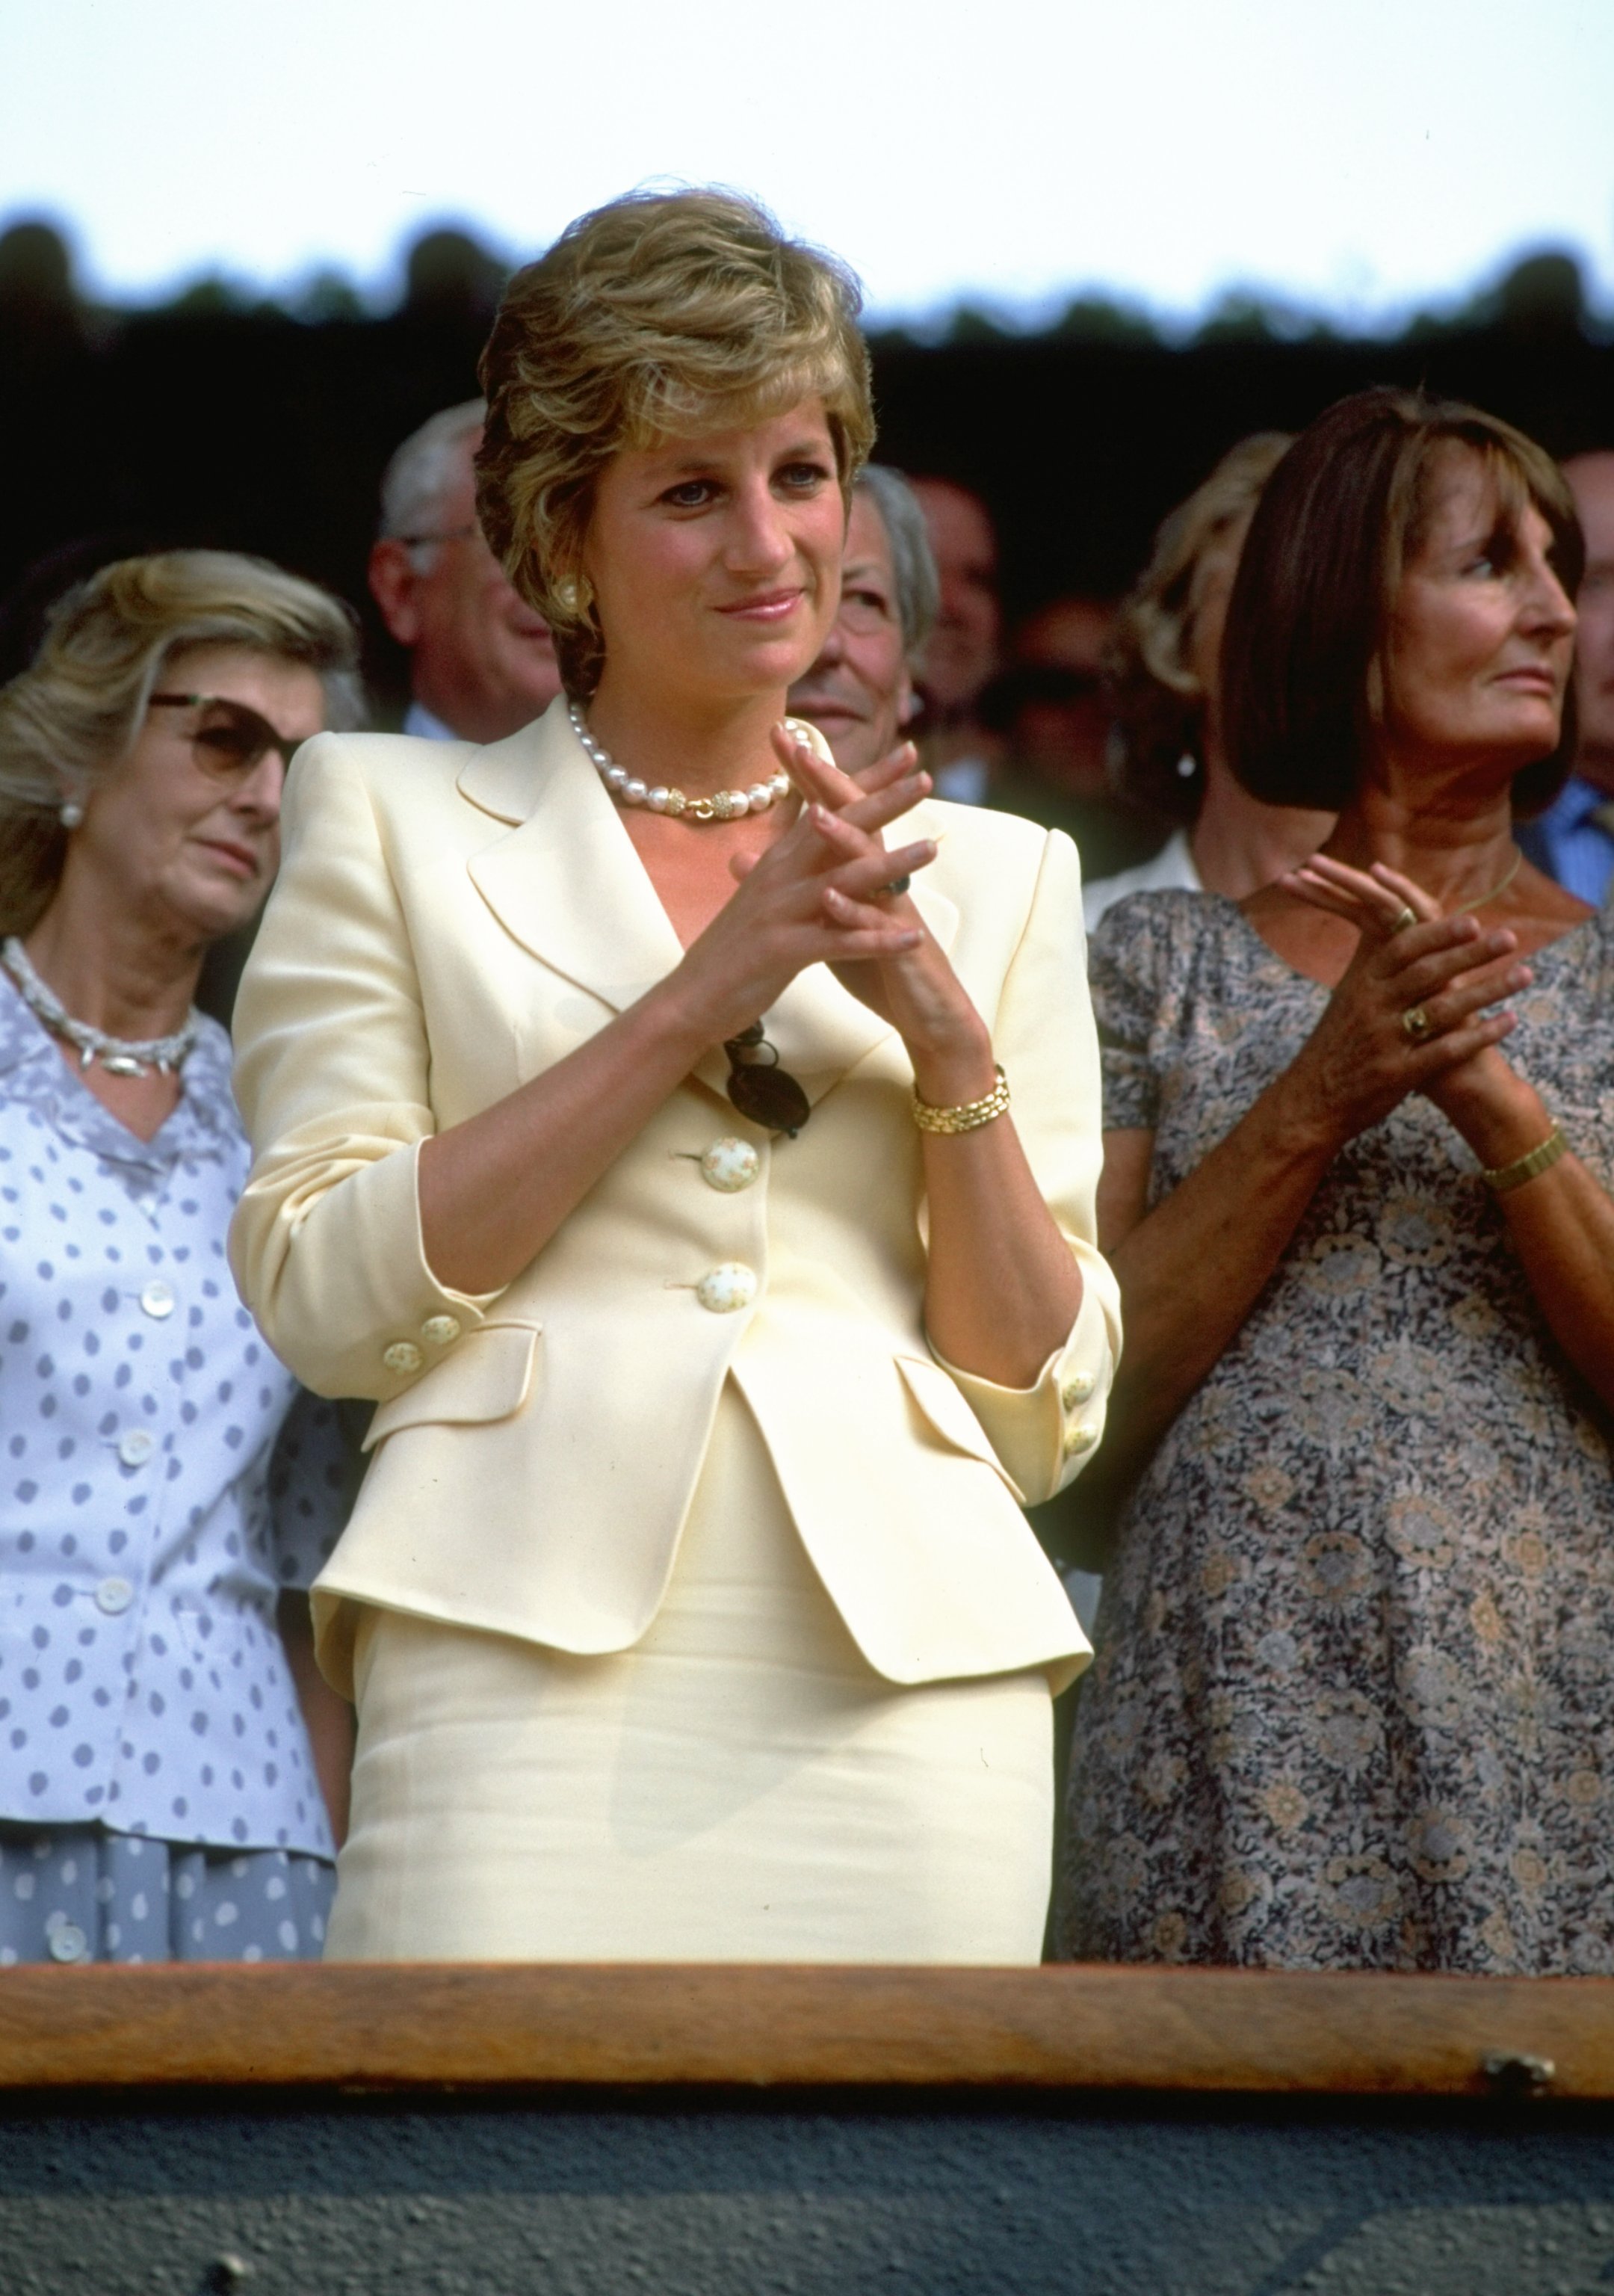 Portrait of Diana, Princess of Wales during the Lawn Tennis Championships on July 9, 1995 at Wimbledon in London | Photo: Getty Images